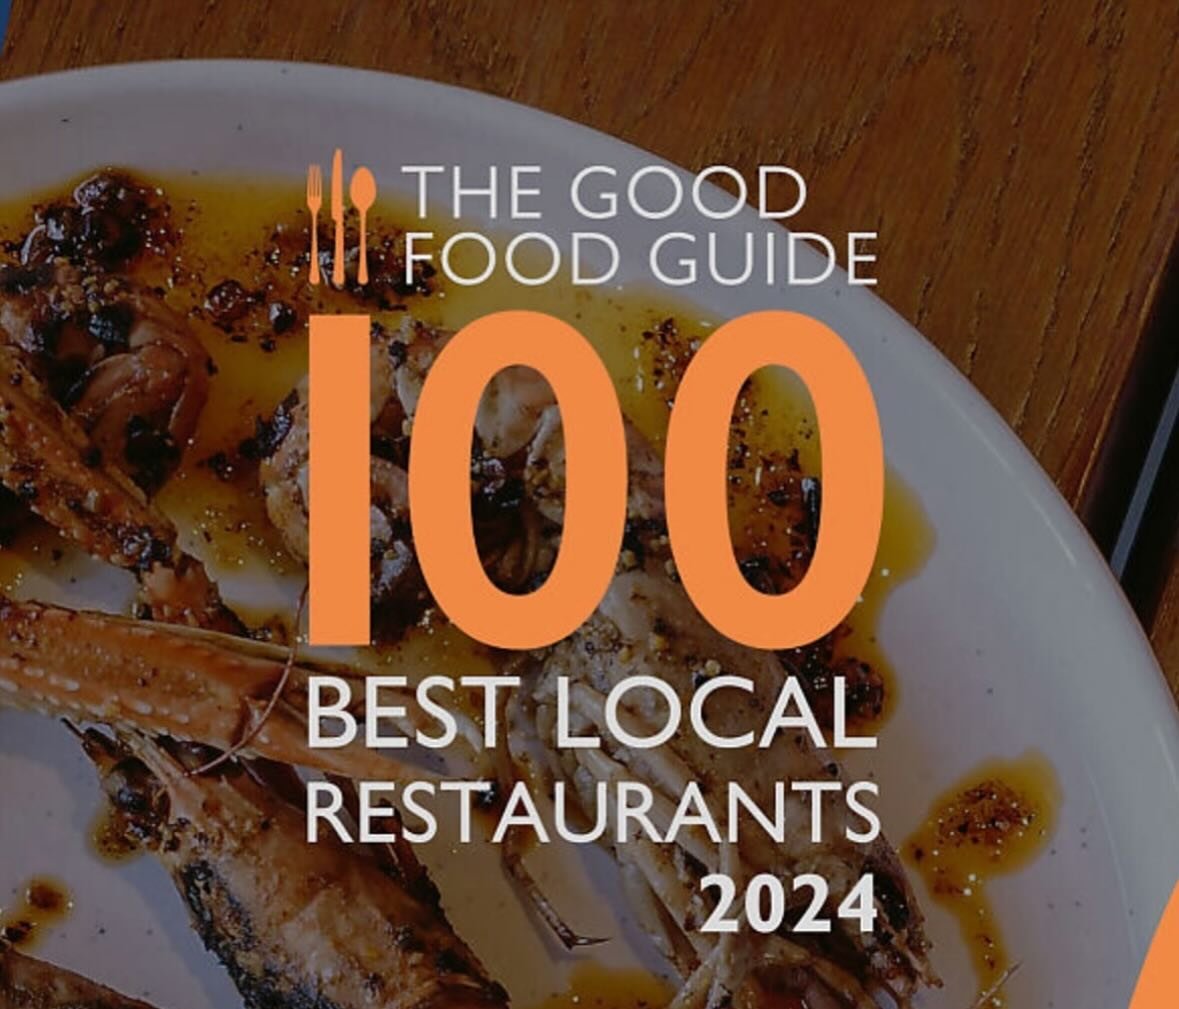 Nominations are now open for @goodfoodguideuk 100 best local restaurants 2024. We would love your vote if you have enjoyed a meal or drink at our pub! 🙌🏻

Link in our bio to cast your vote today 🗳️
#eatlocal #gfgblr24 #goodfoodguideuk